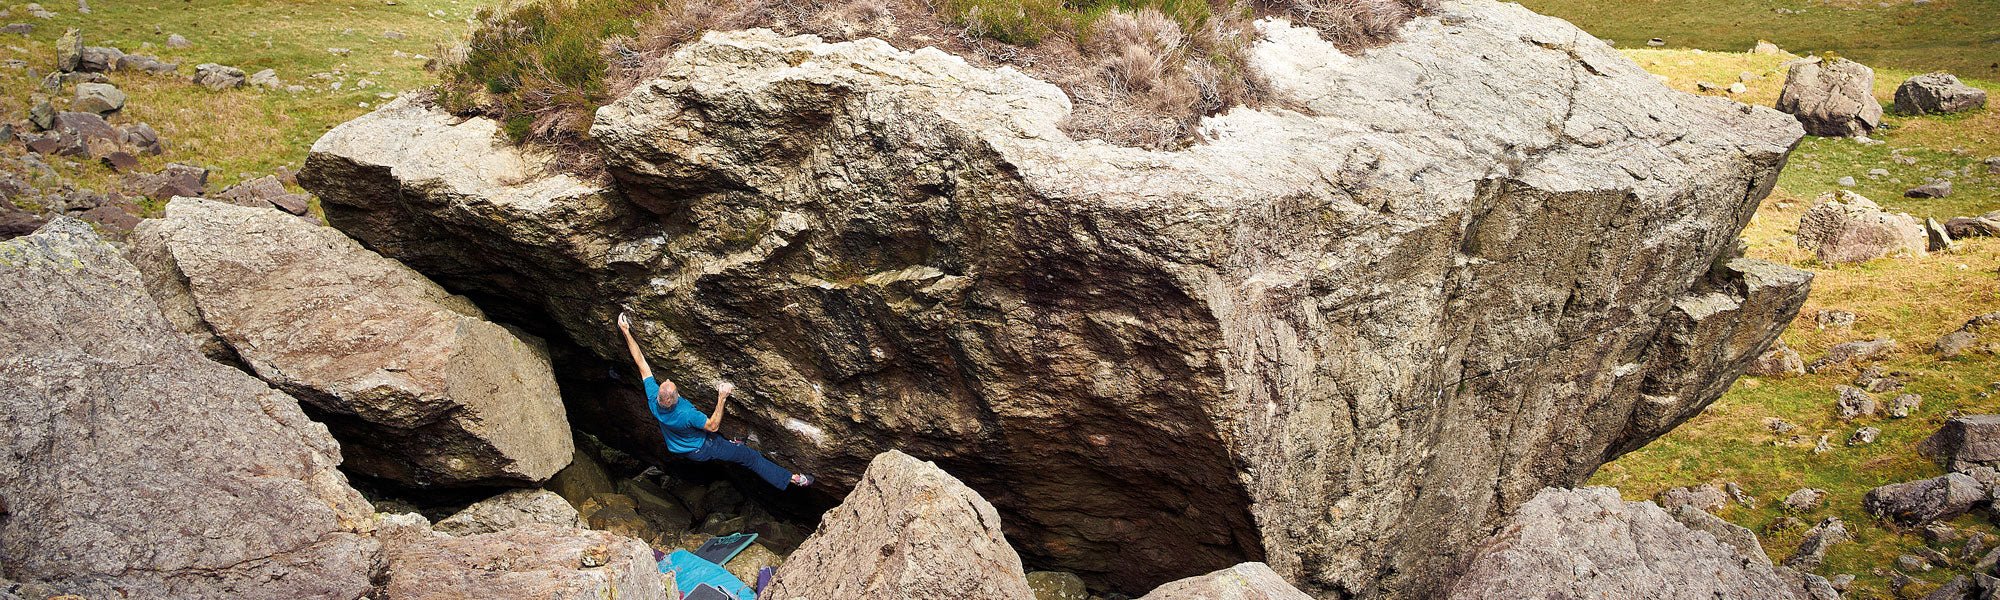 Bouldering at the Lad Stones from Lake District Bouldering by Greg Chapman and Vertebrate Publishing